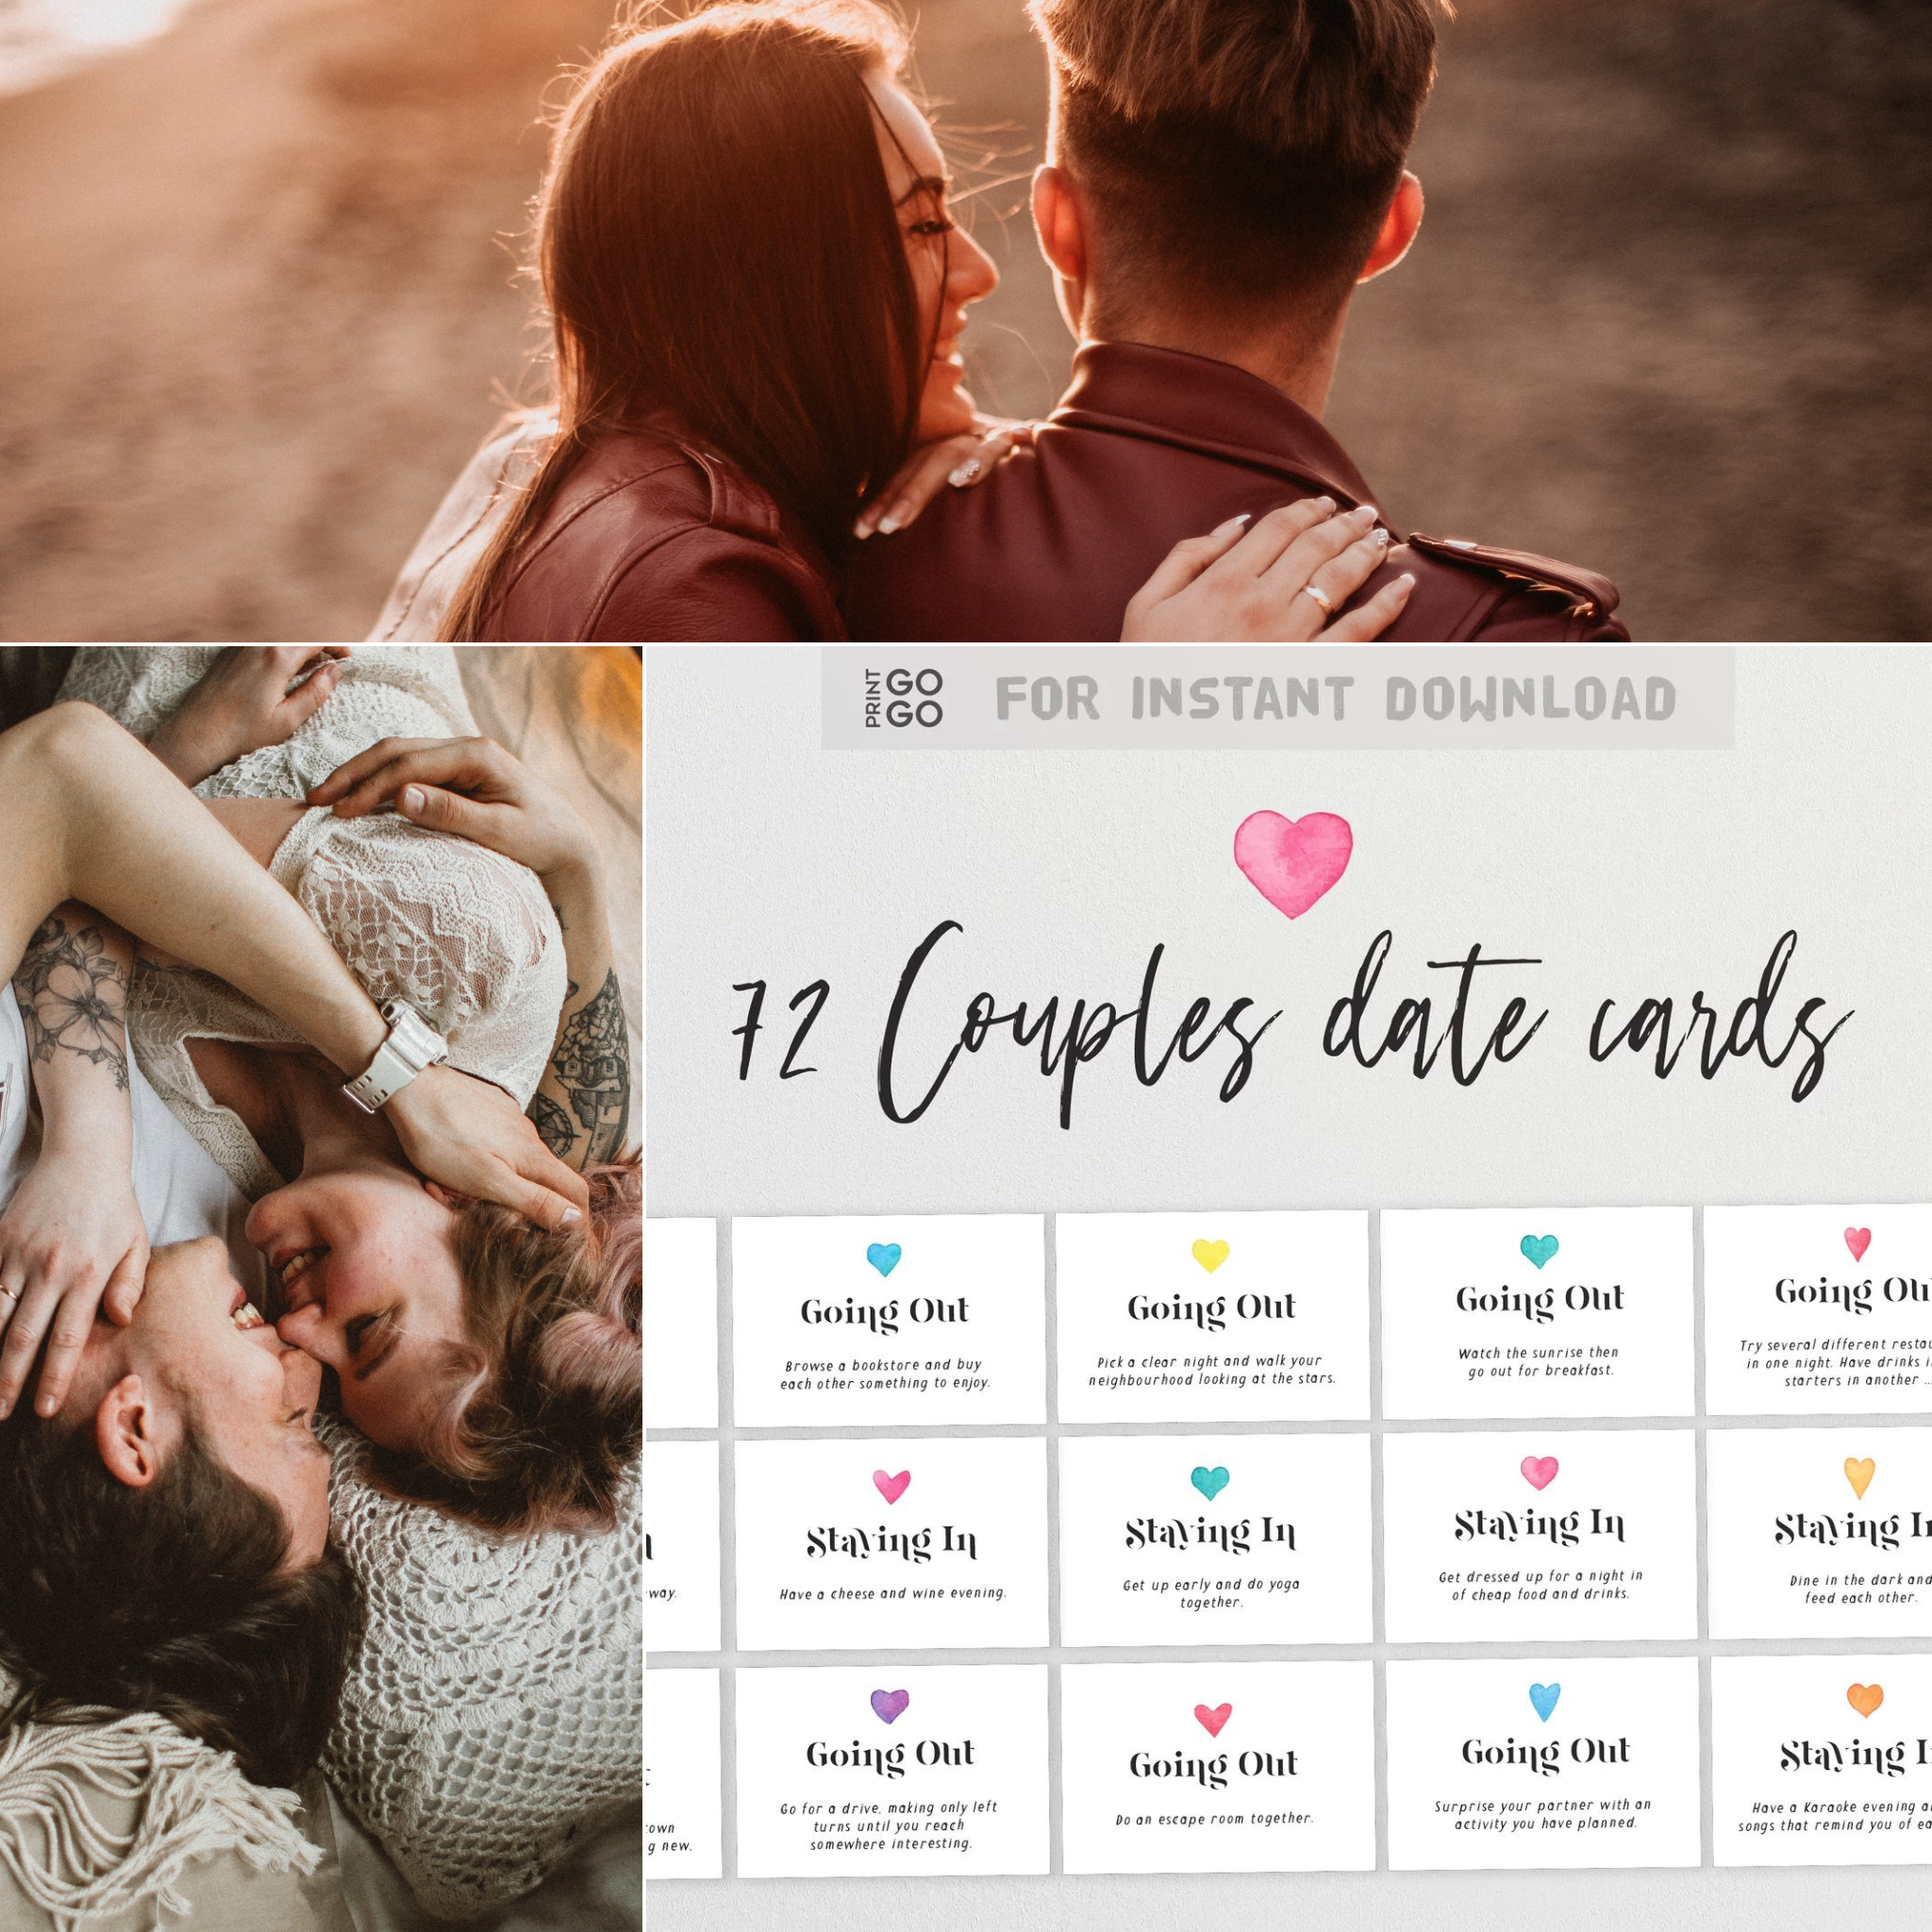 52 Couple Date Card Ideas for Going Out and Staying In – Print GoGo